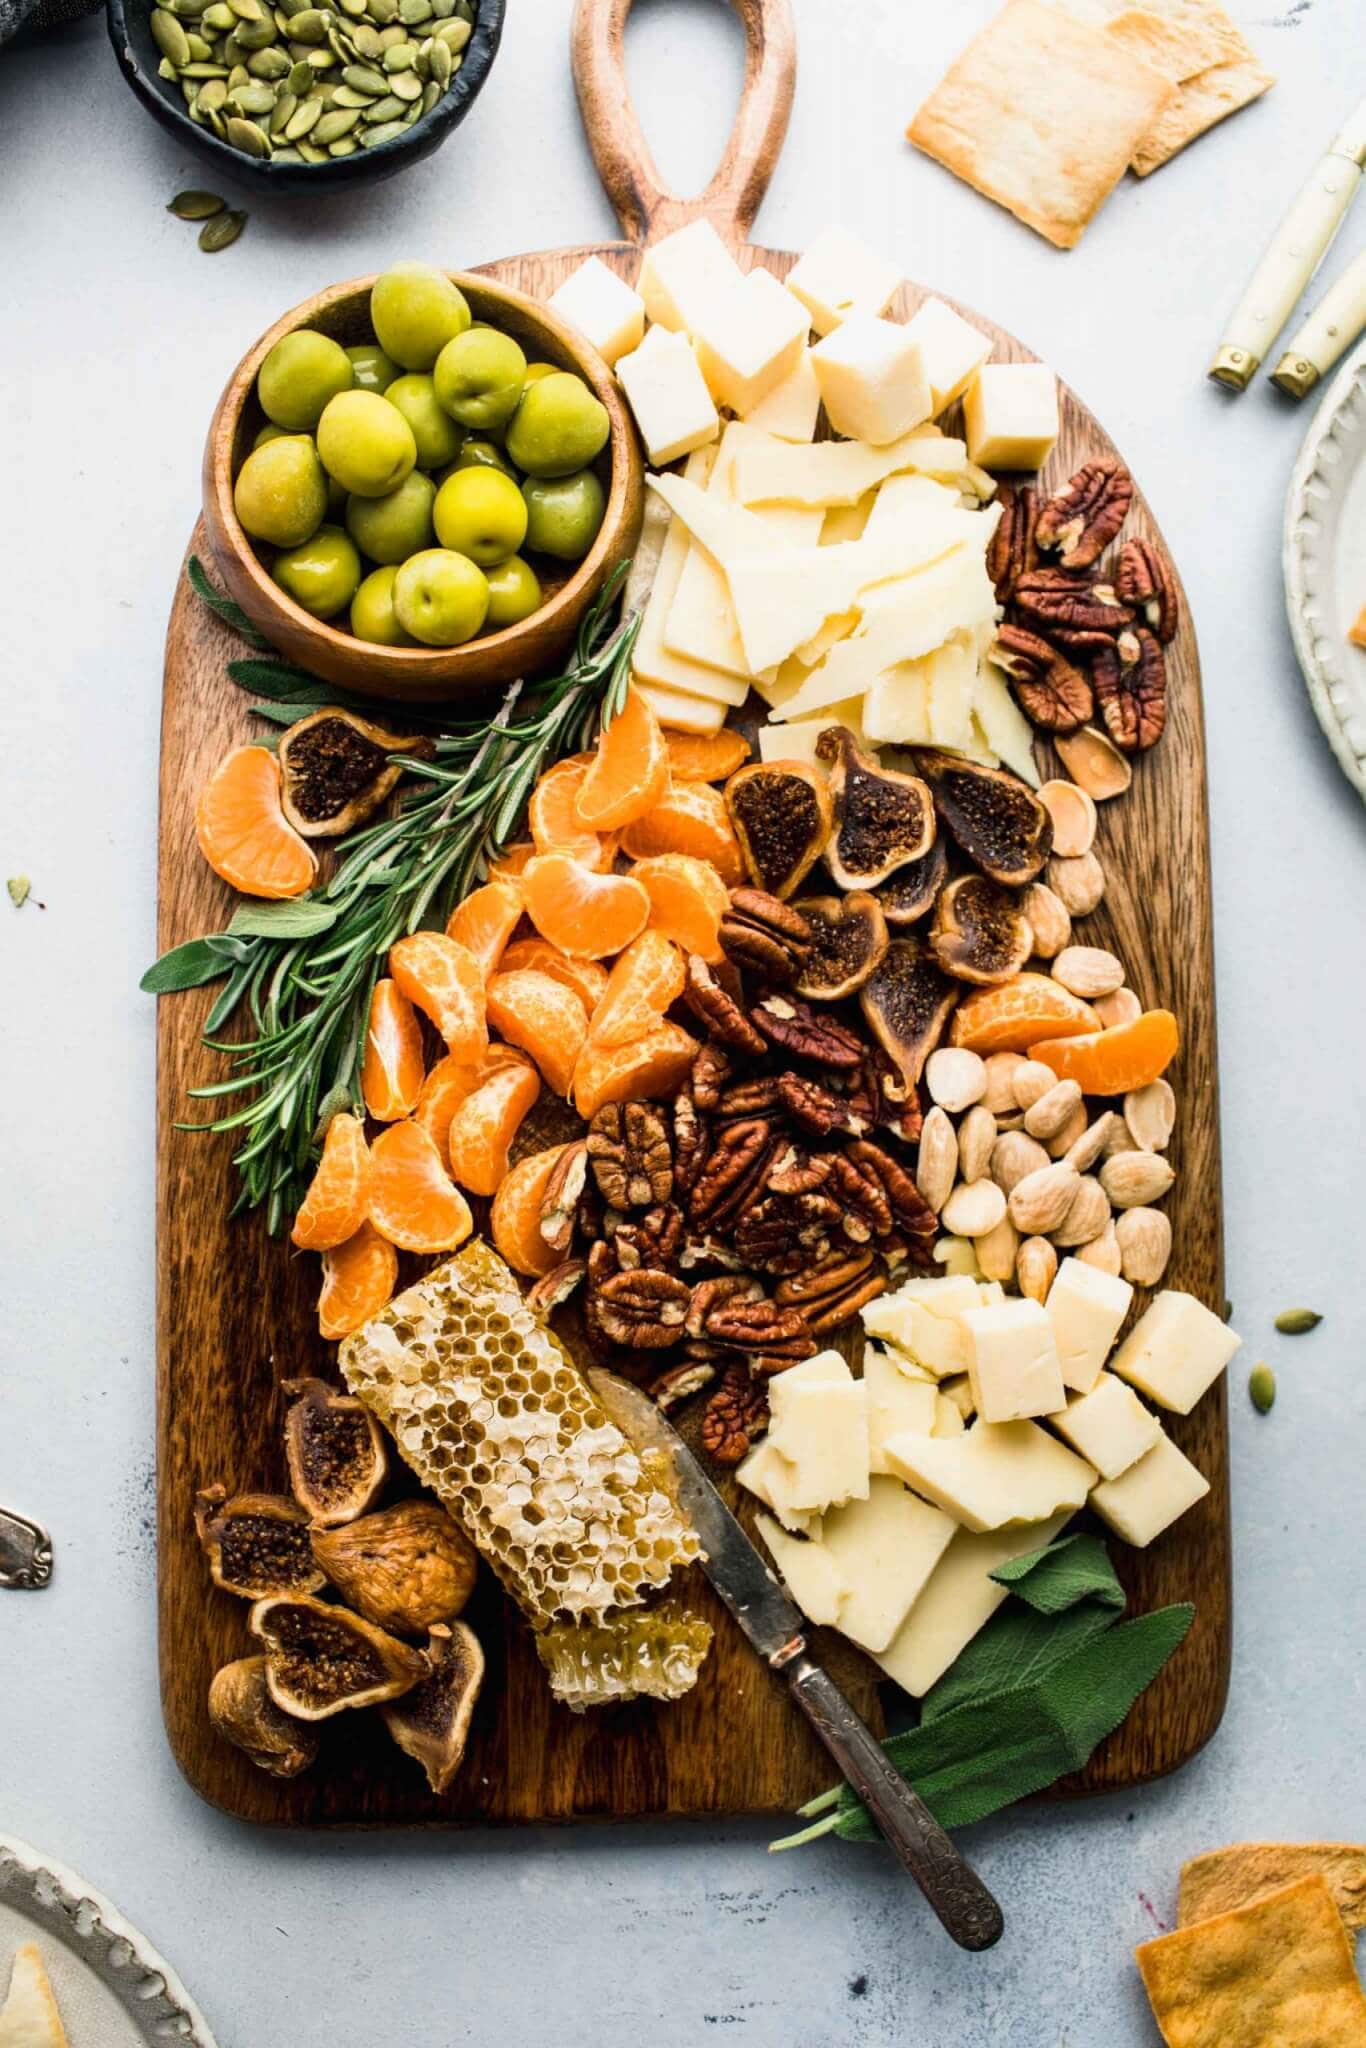 Cheeses, nuts, olives and fruits arranged on wooden serving board.